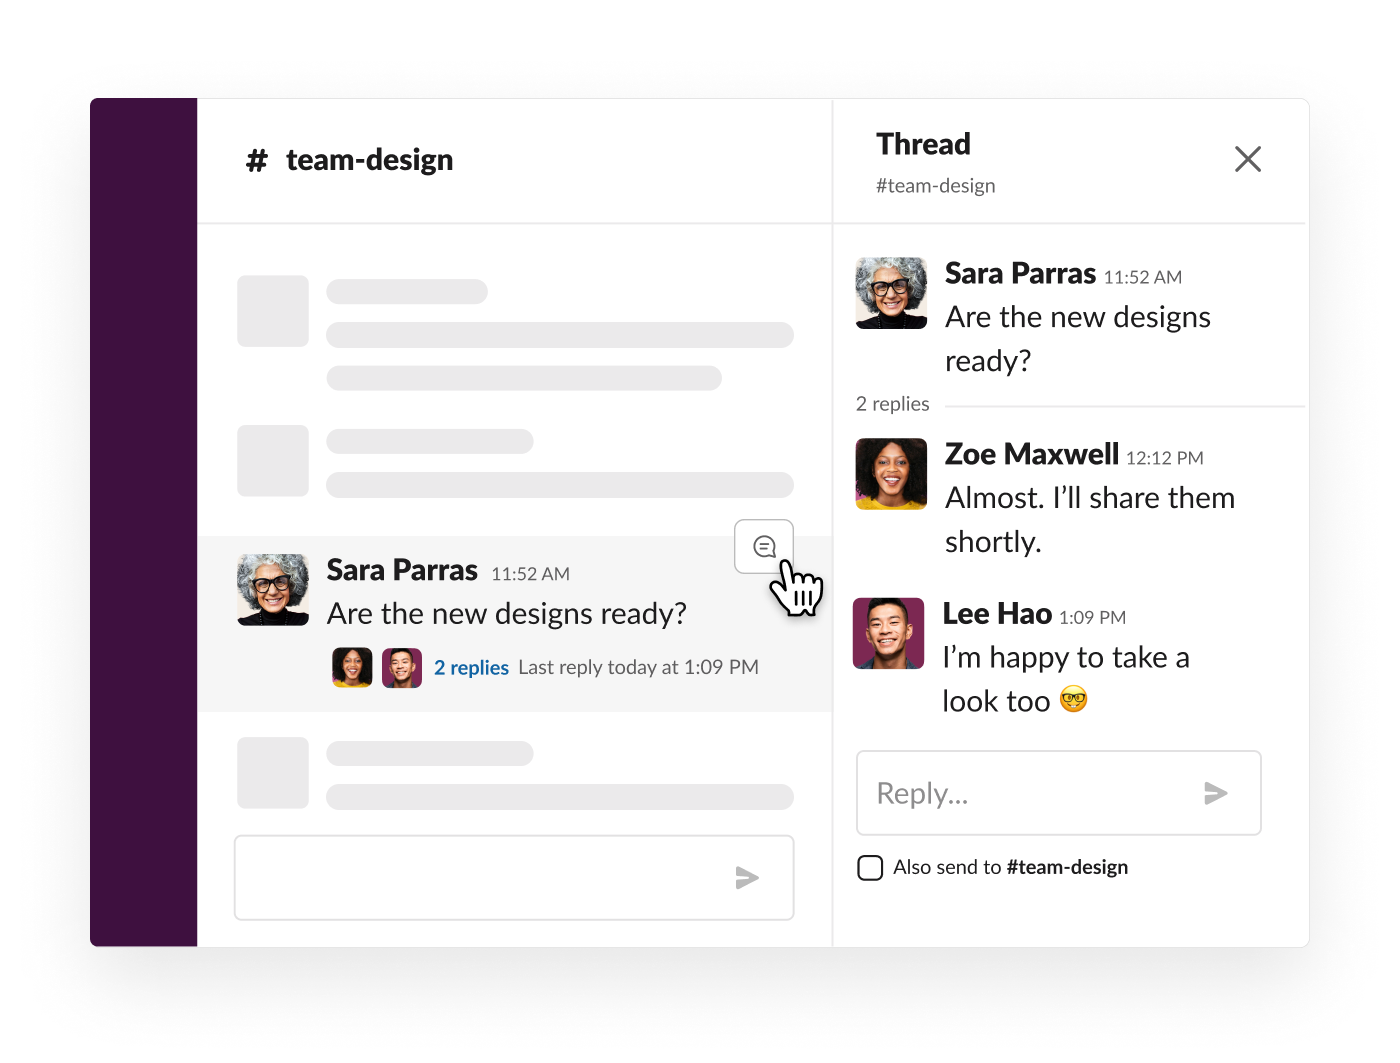 A thread to keep discussion organized in Slack